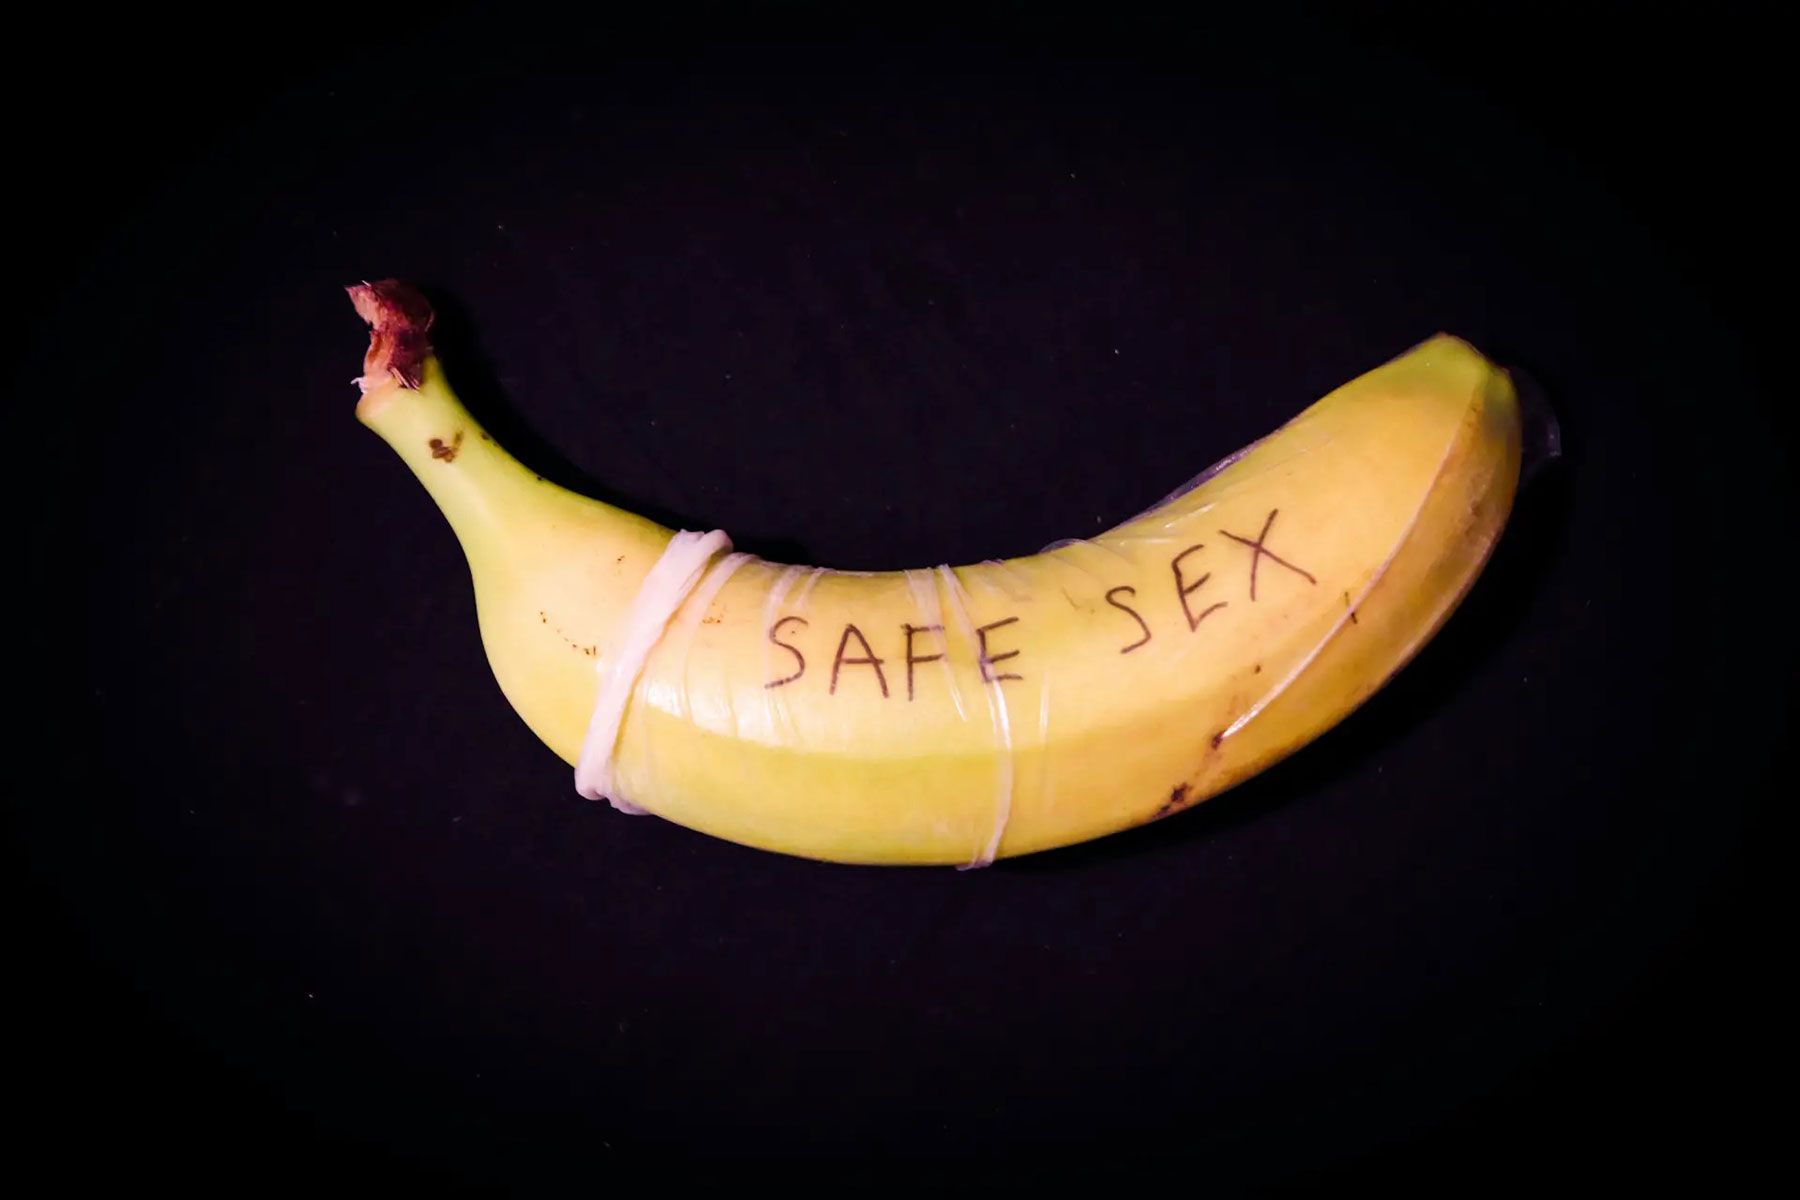 banana wrapped in a condom with the words "safe sex" written on it on a black background